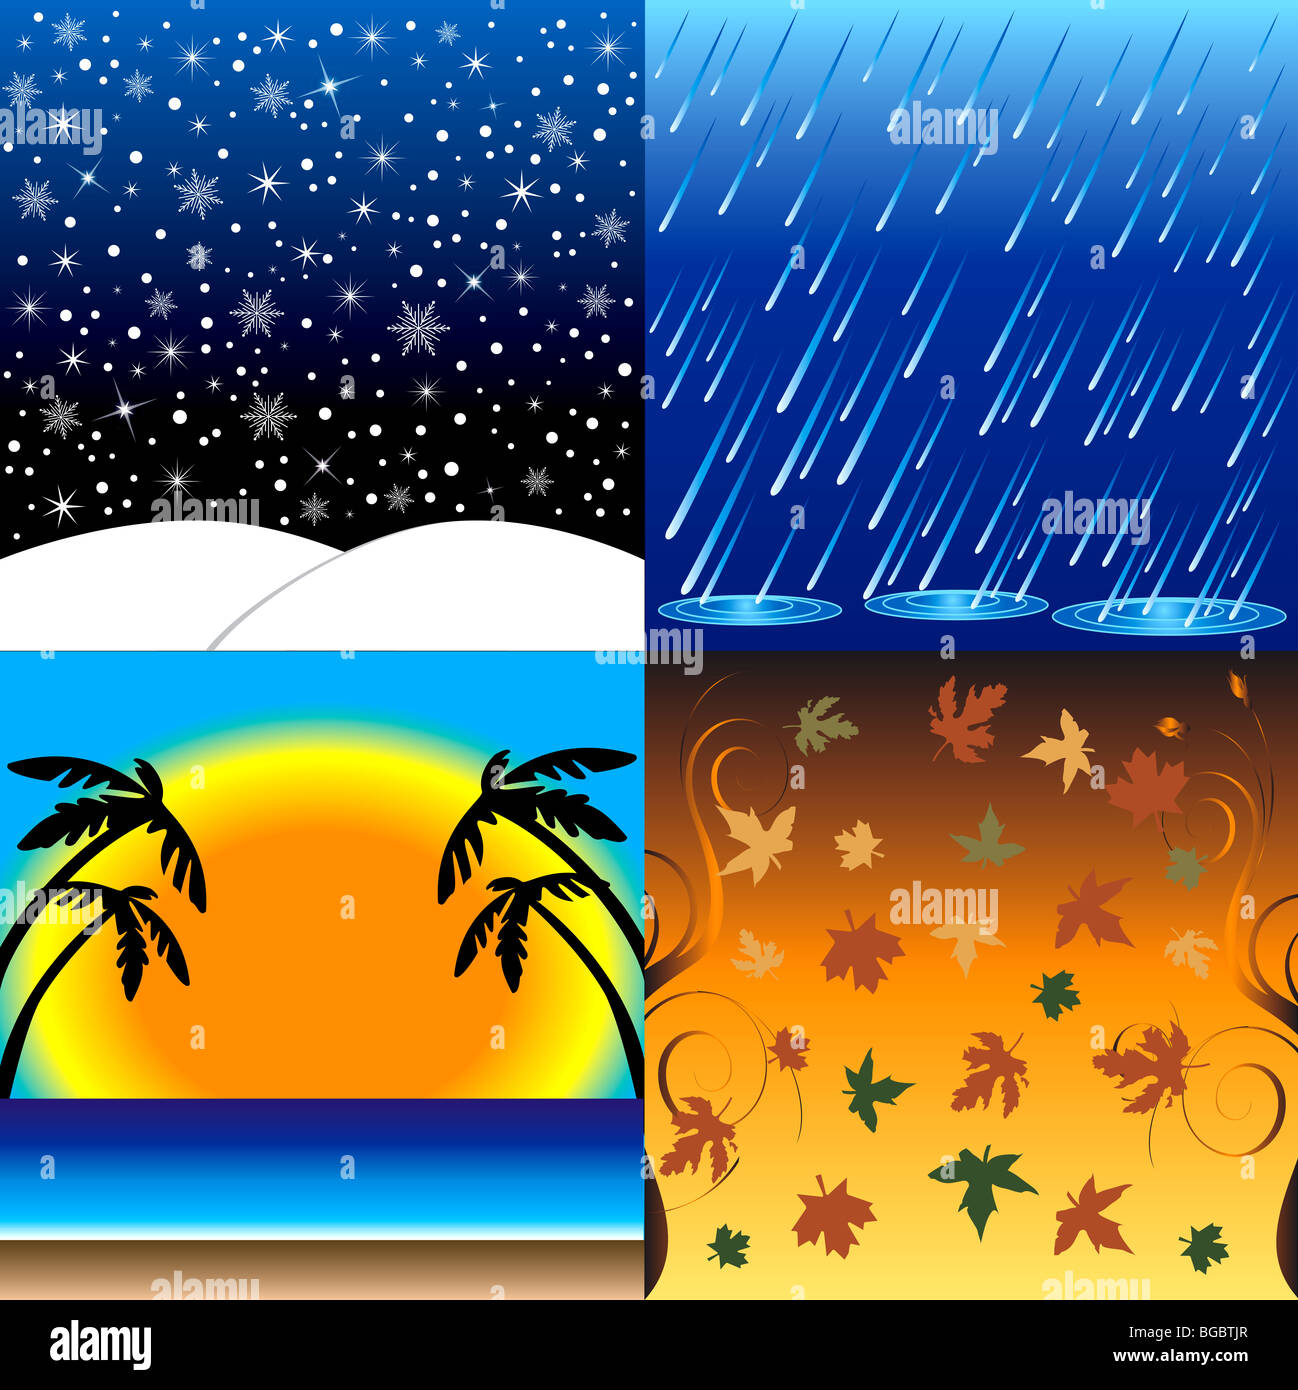 Vedcctor Ilustration of the four seasons, Winter, Spring, Summer and Fall. Stock Photo